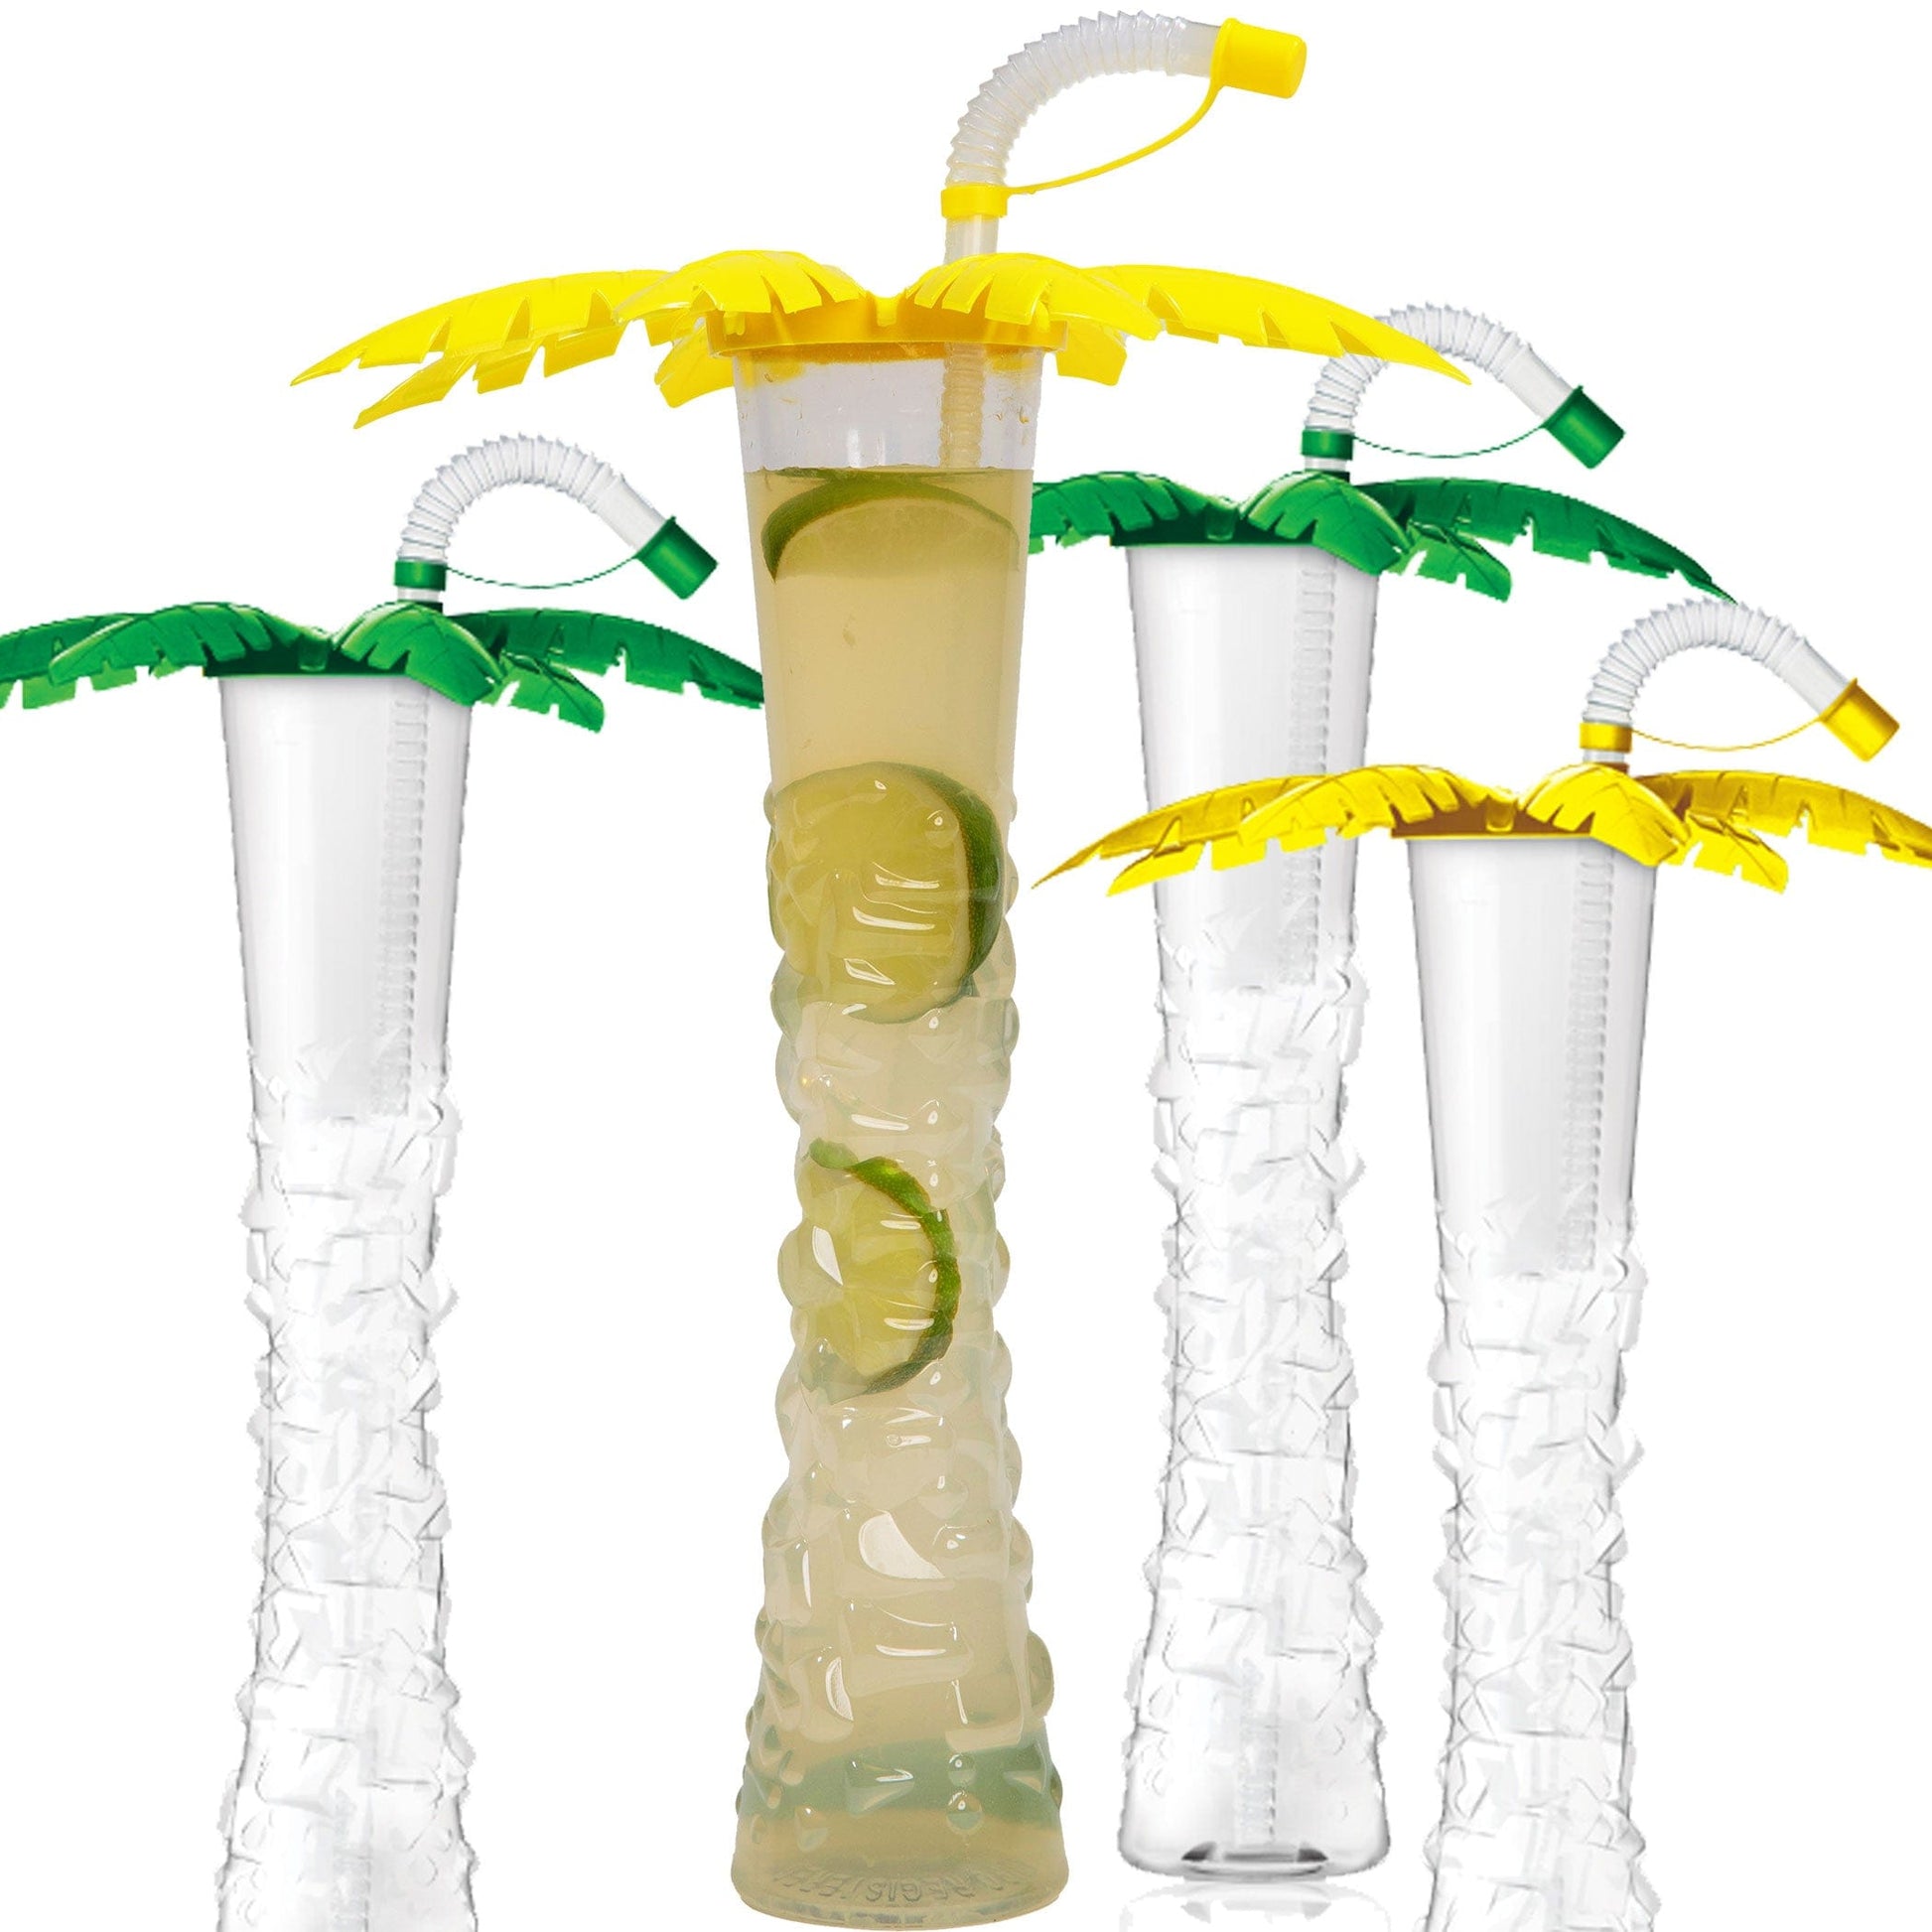 https://noveltycupsusa.com/cdn/shop/files/sweet-world-usa-yard-cups-palm-tree-yard-cup-17-oz-box-of-54-cups-clear-cup-with-green-and-yellow-palm-lids-and-straws-sw-57300-gy-cups-with-lids-and-straws-36272727130271.jpg?v=1686240152&width=1946